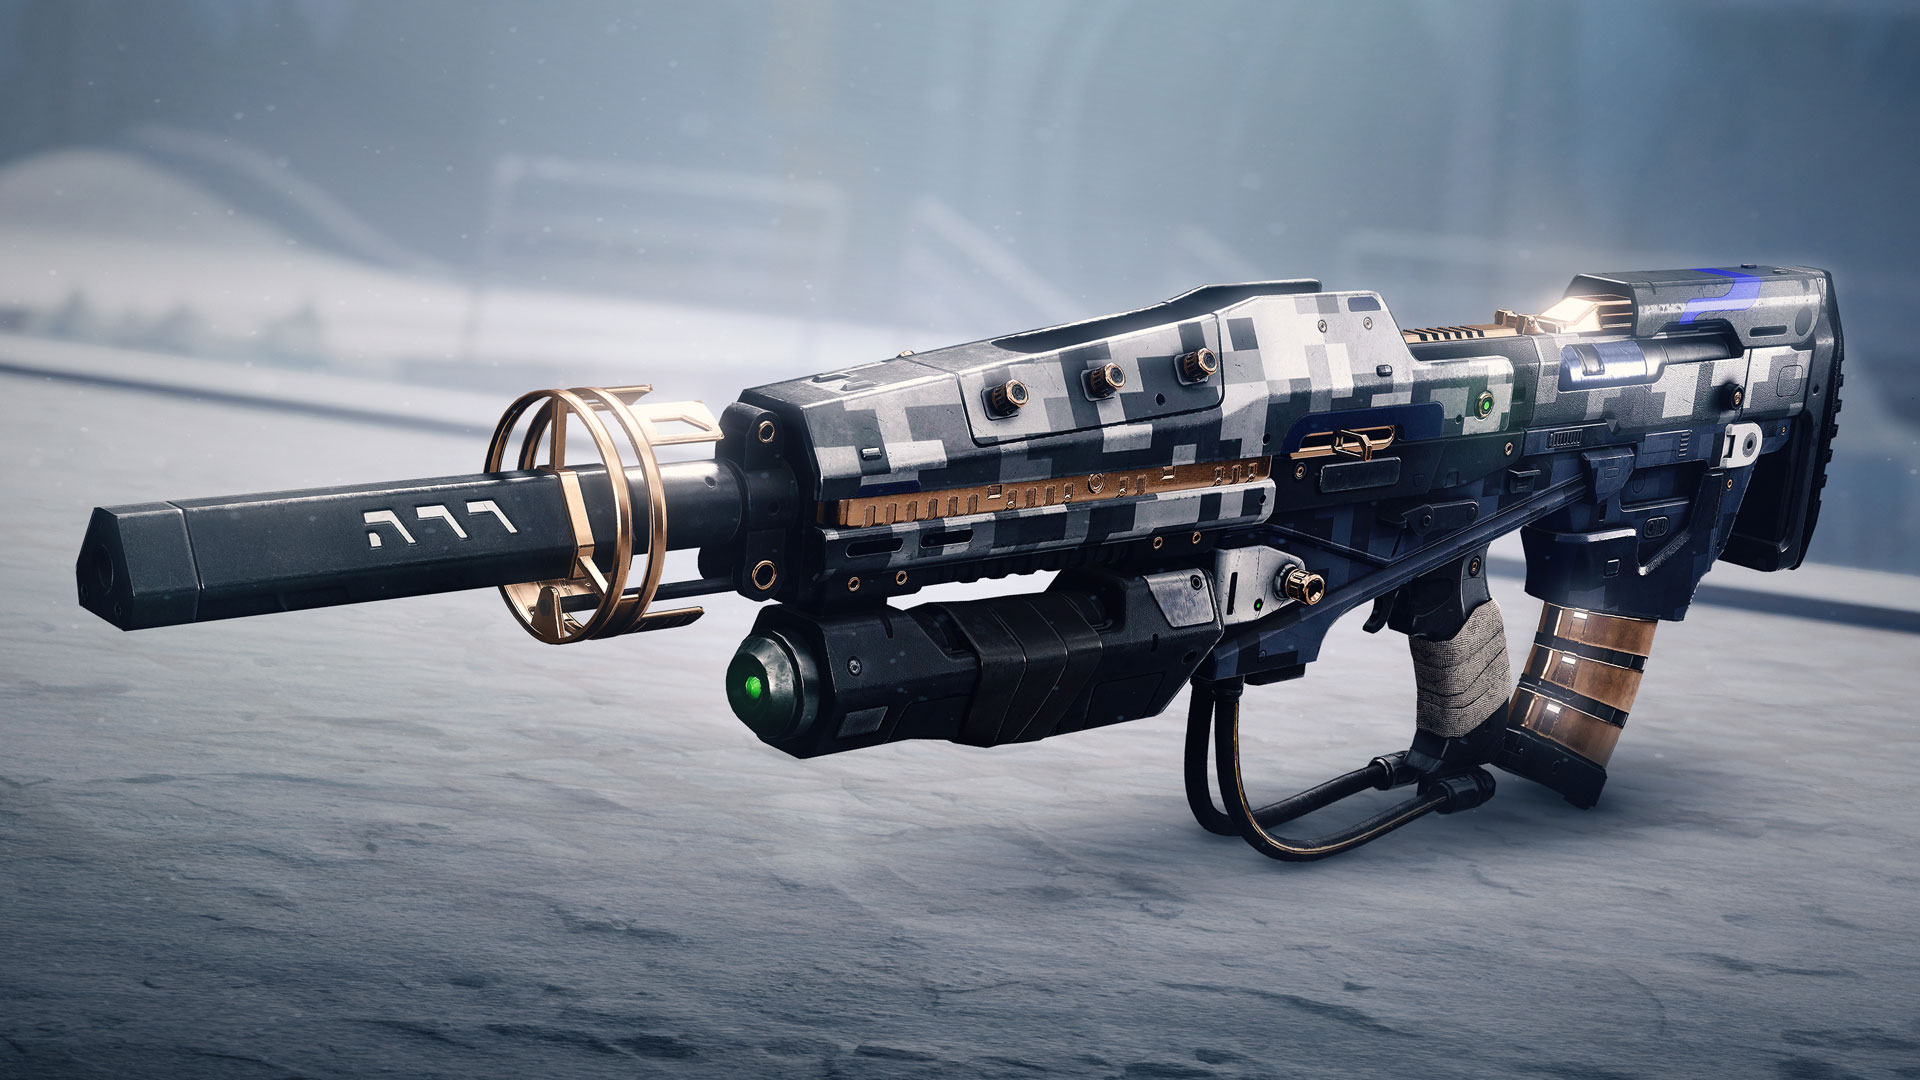 Destiny 2 Beyond Light Exotic weapons: A close-up of No Time to Explain against a snowy backdrop.